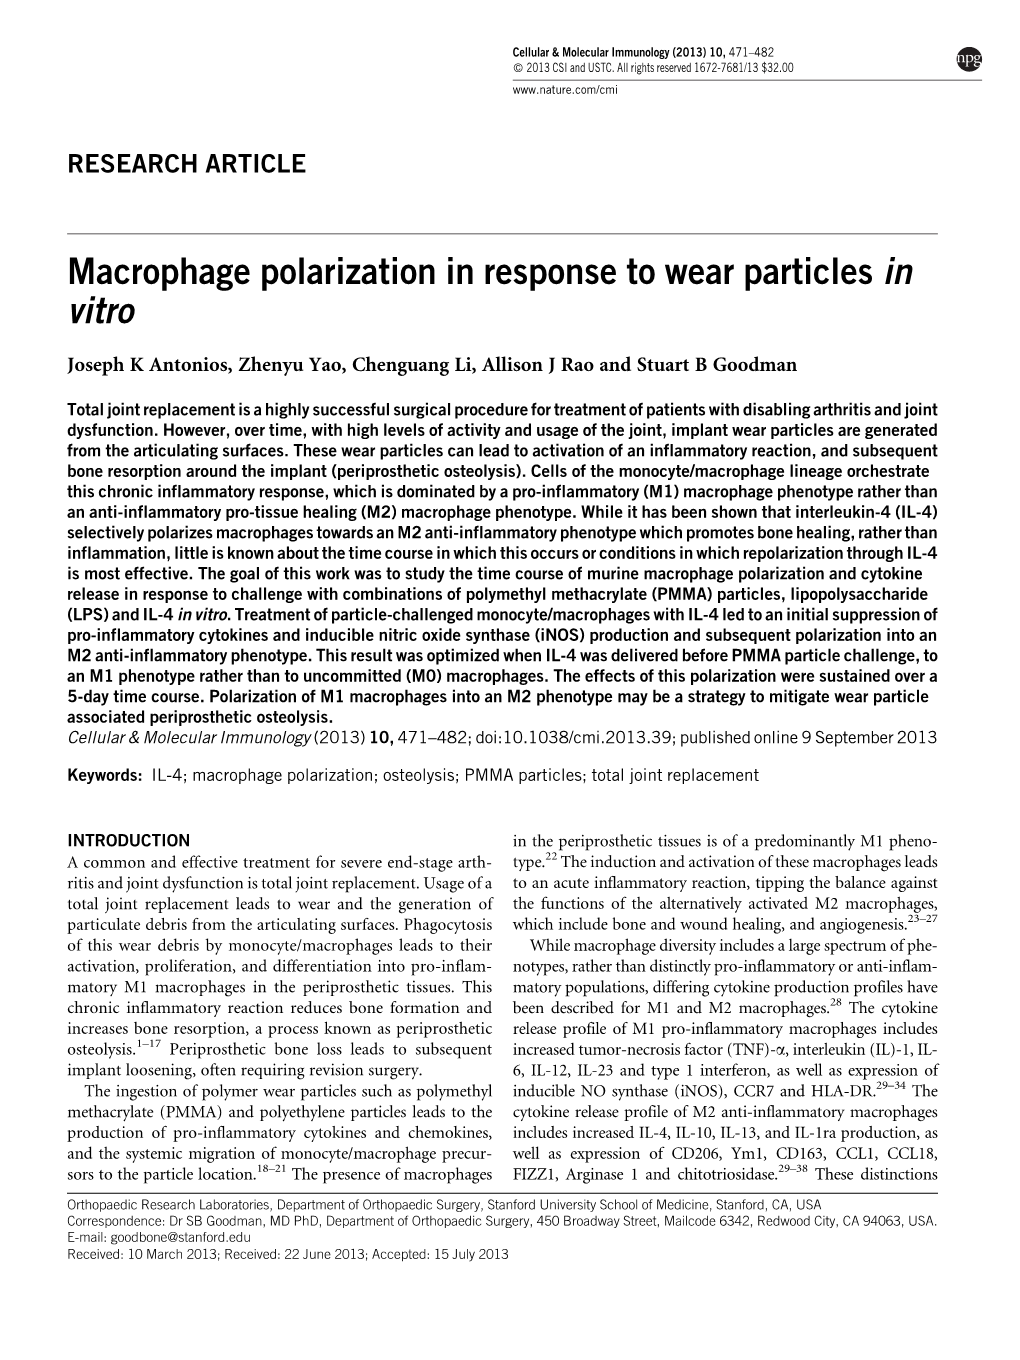 Macrophage Polarization in Response to Wear Particles in Vitro